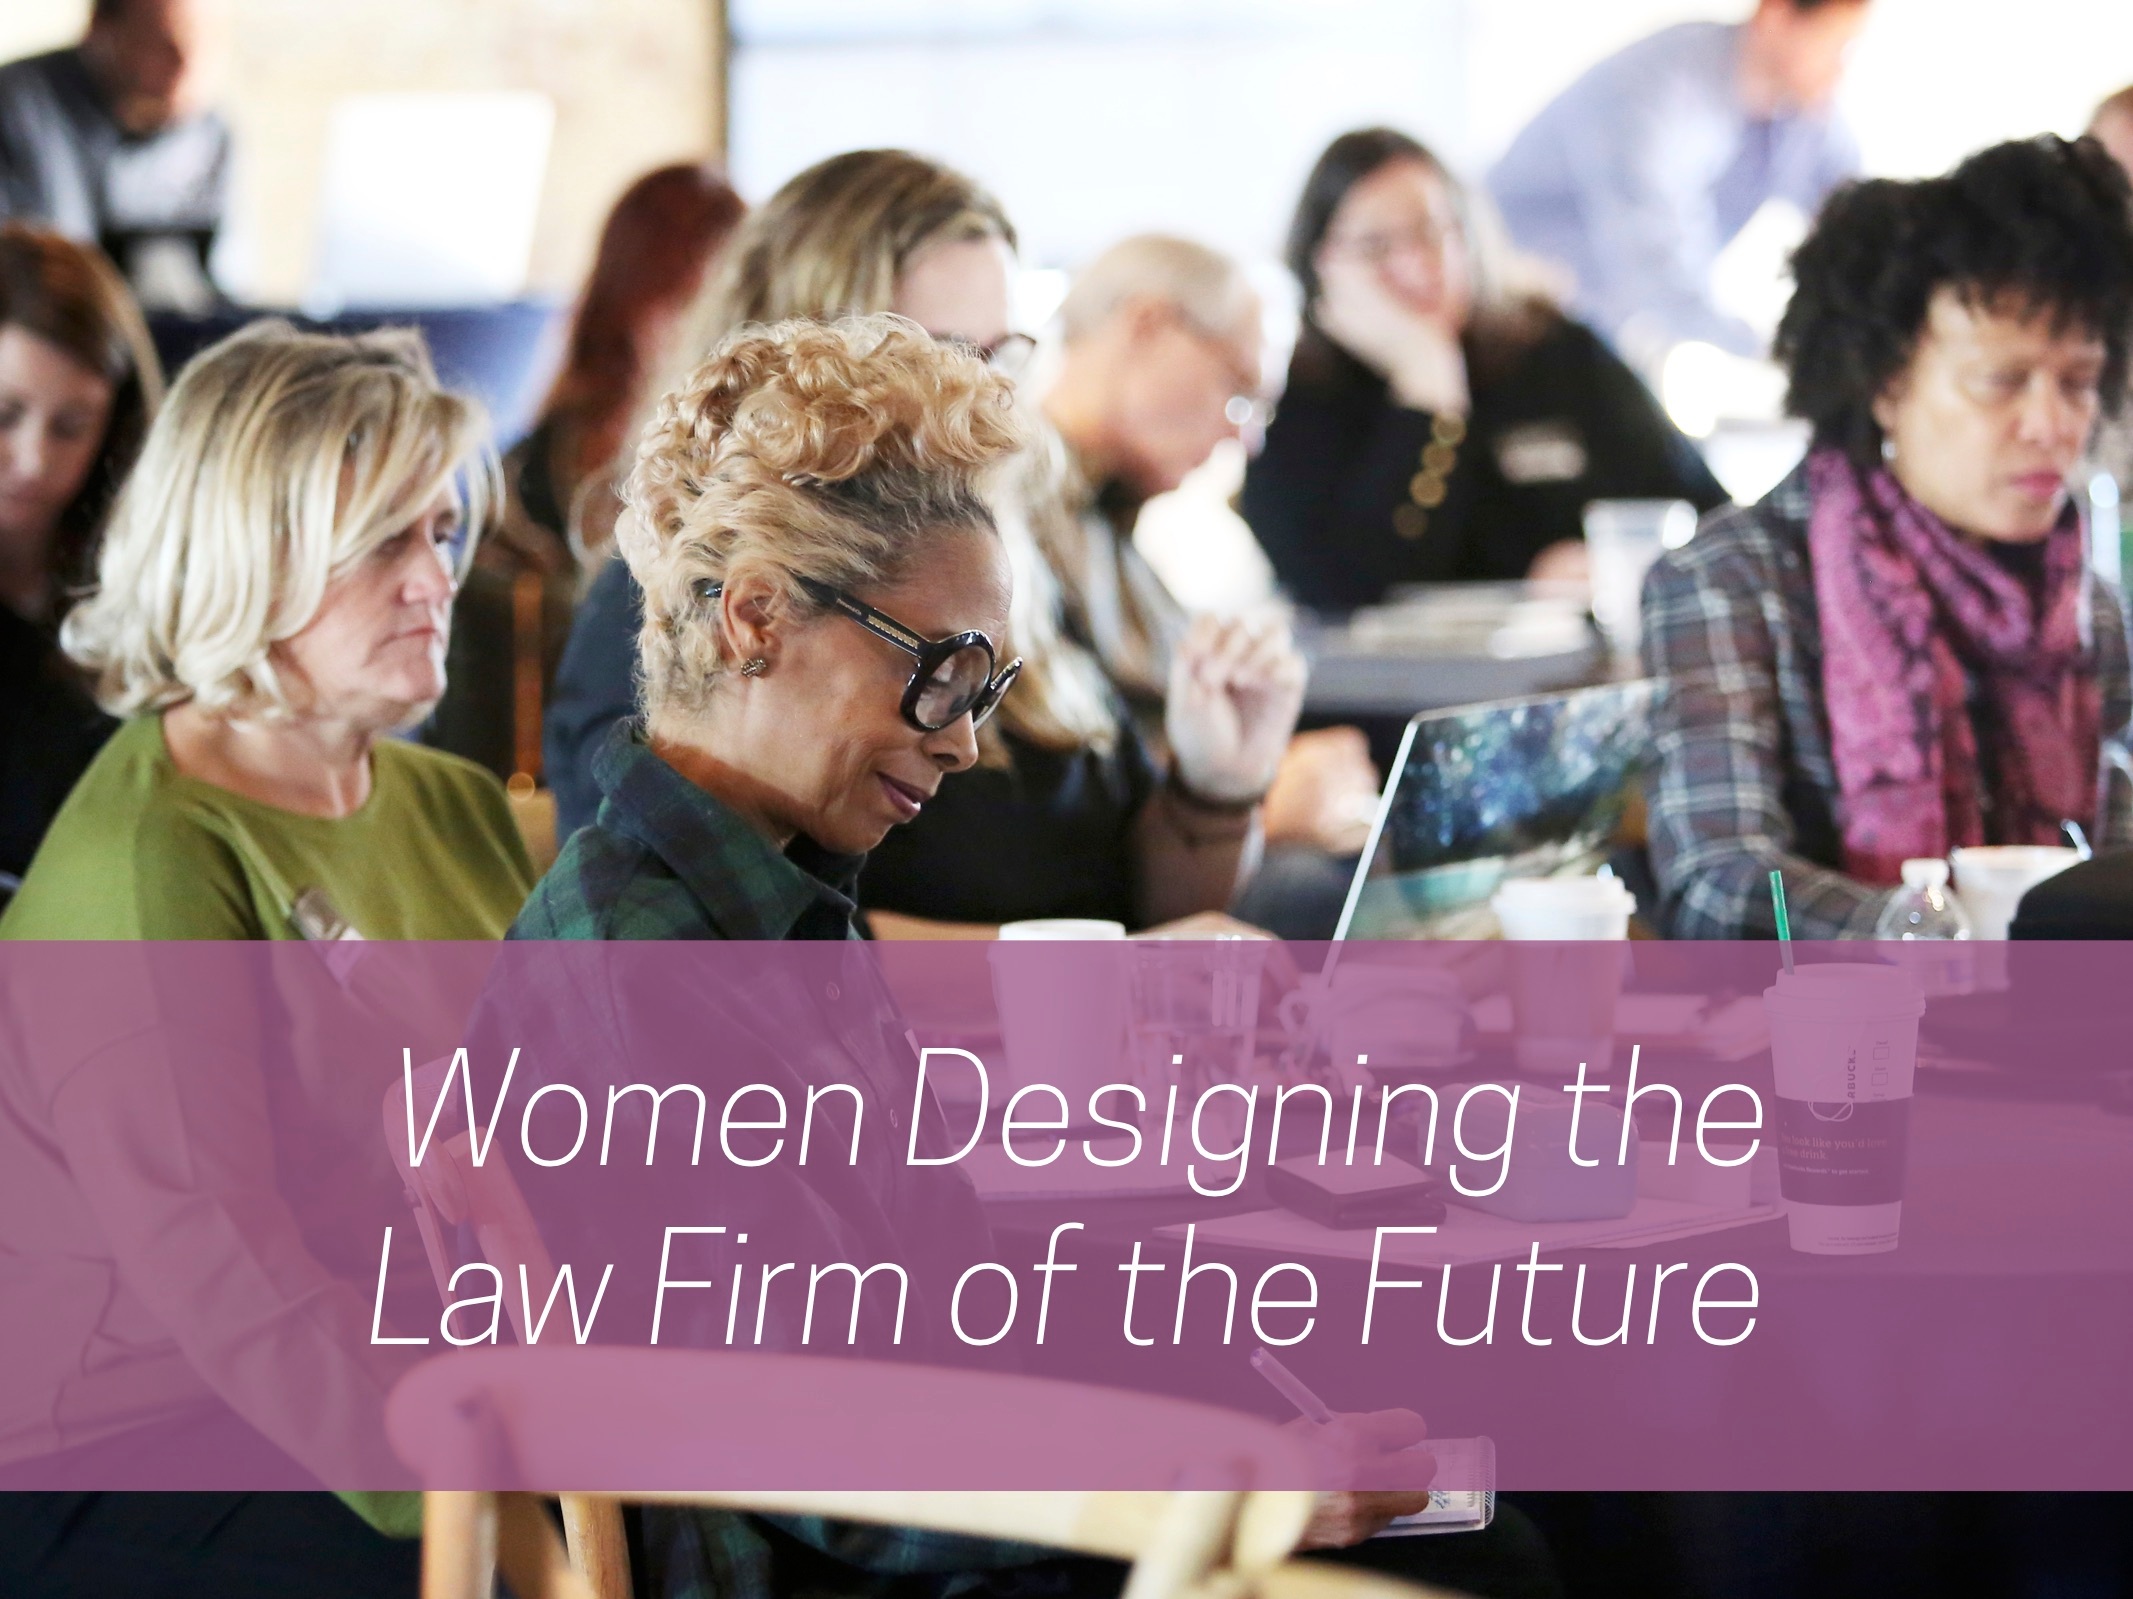 Women are designing the law firm of the future.jpg